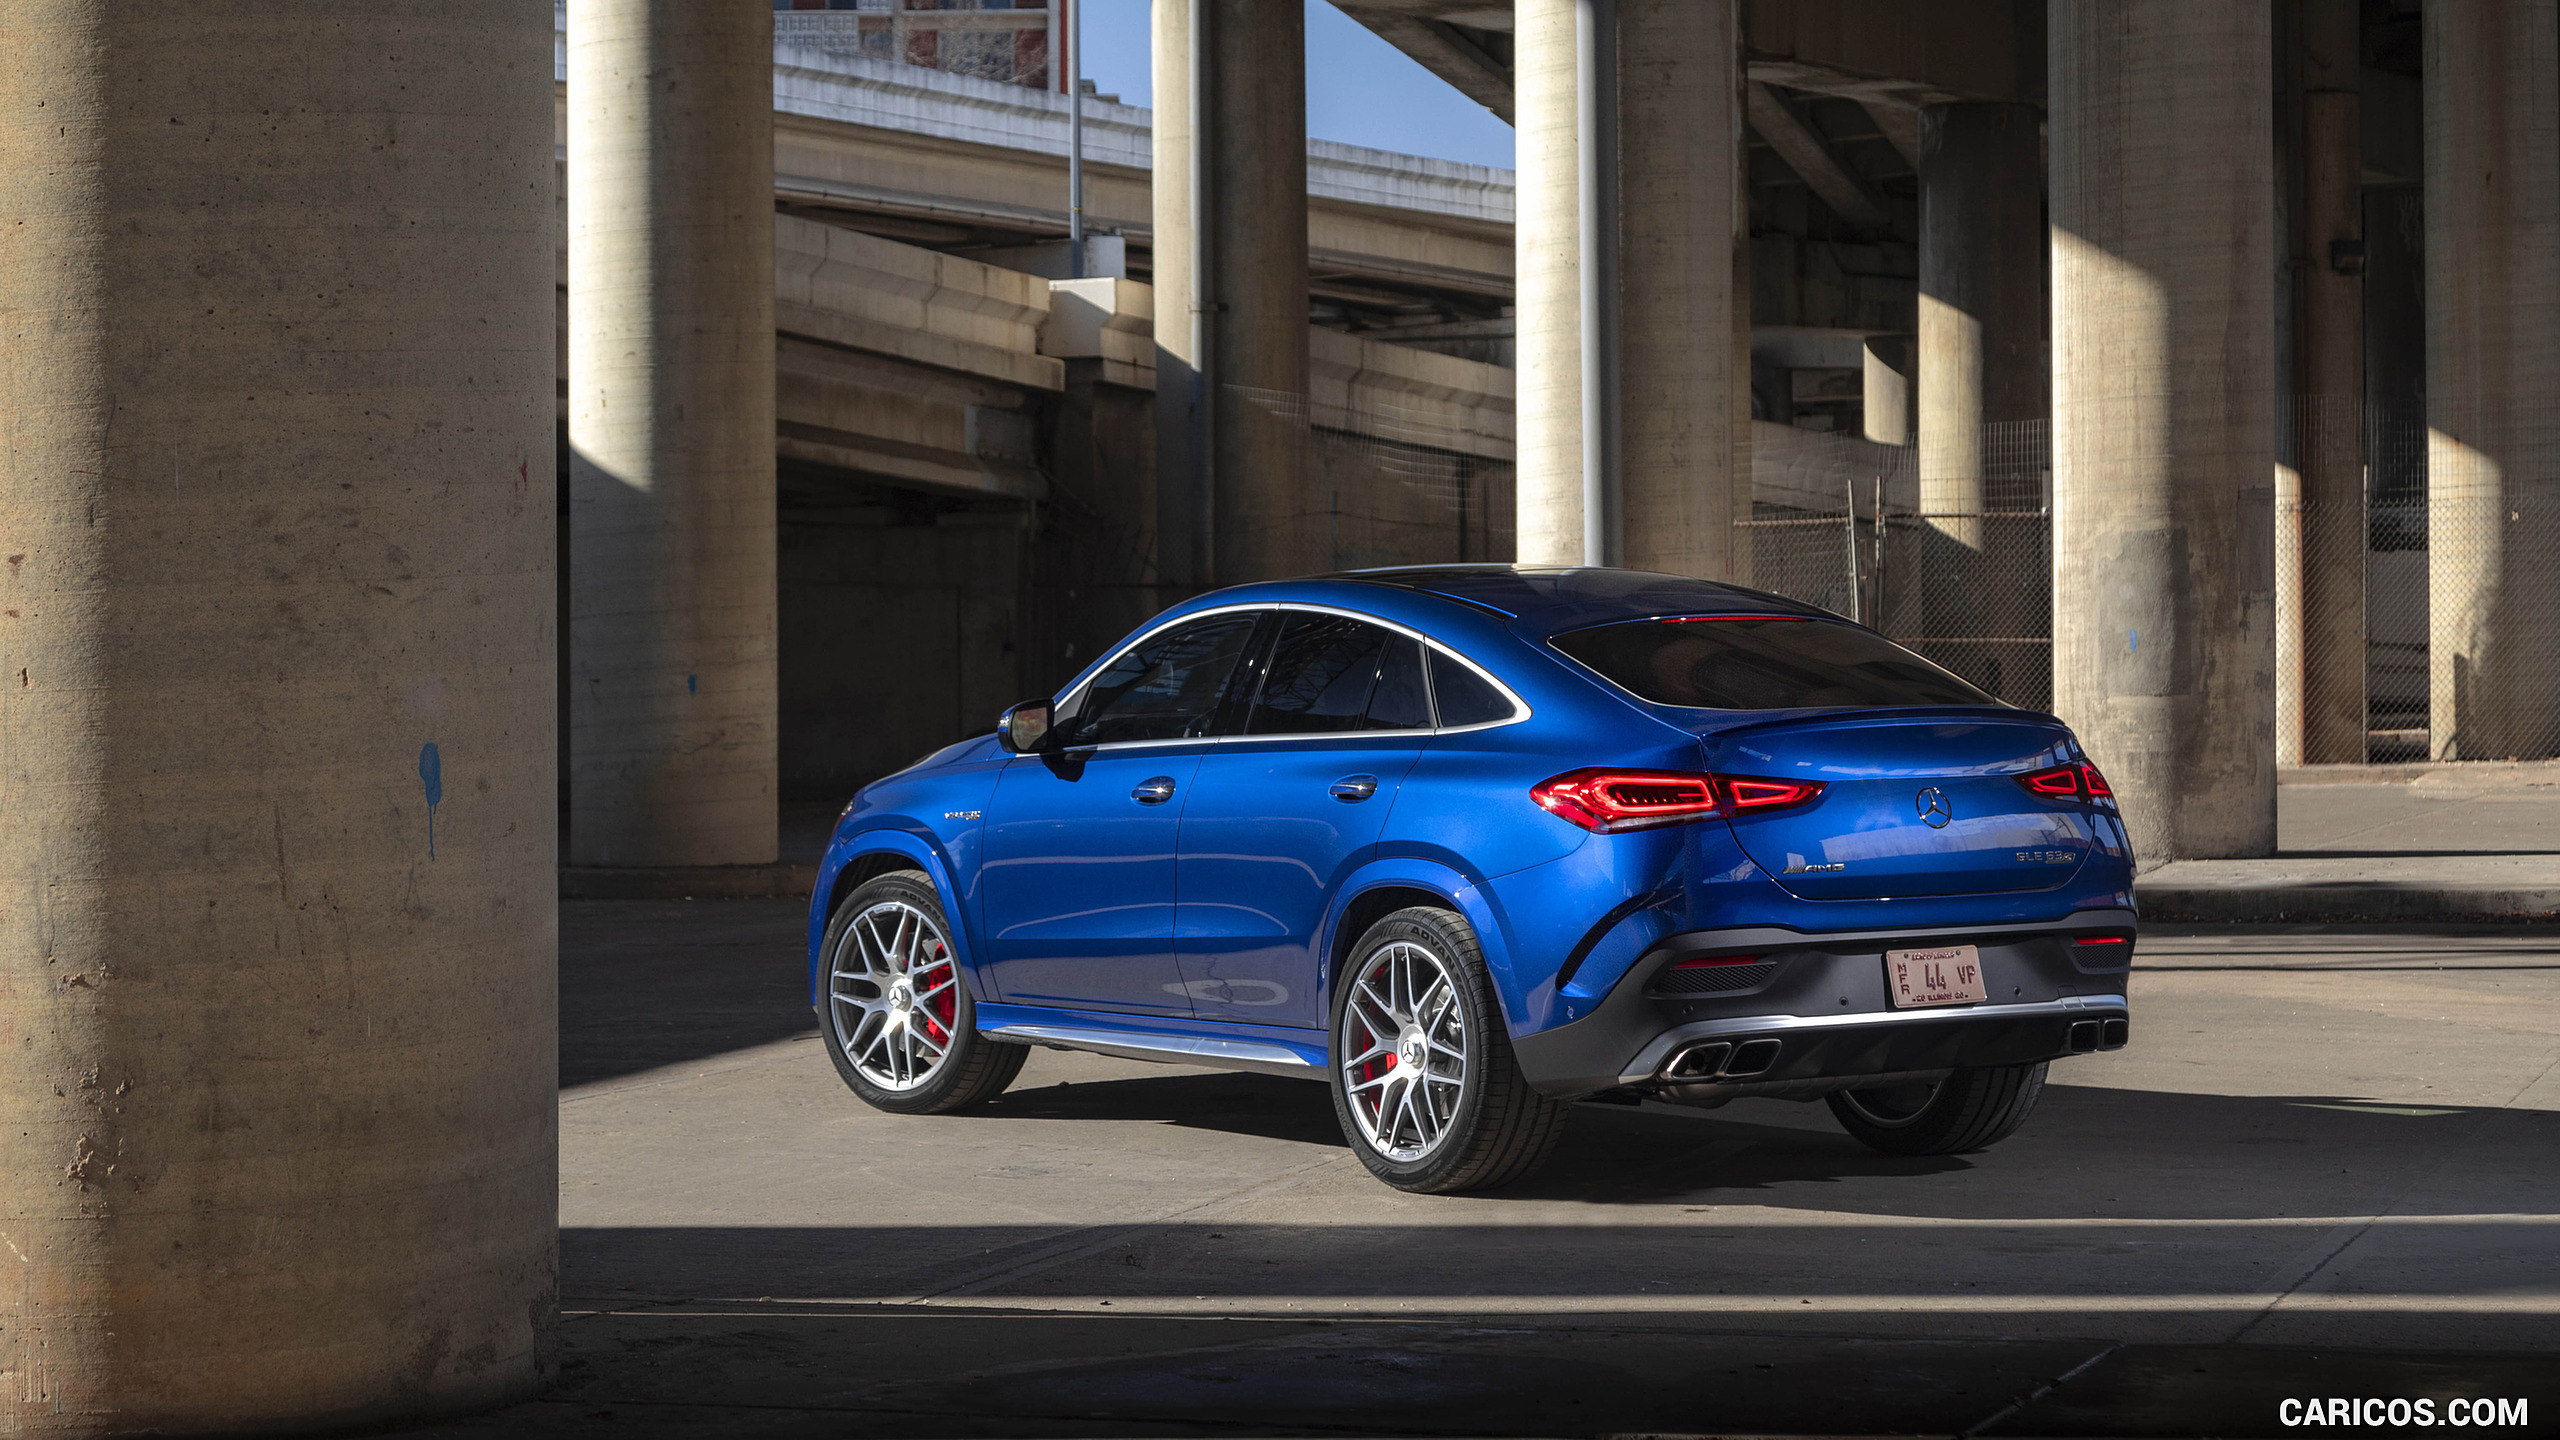 2021 Mercedes-AMG GLE 63 S Coupe (US-Spec) - Rear Three-Quarter, #43 of 66